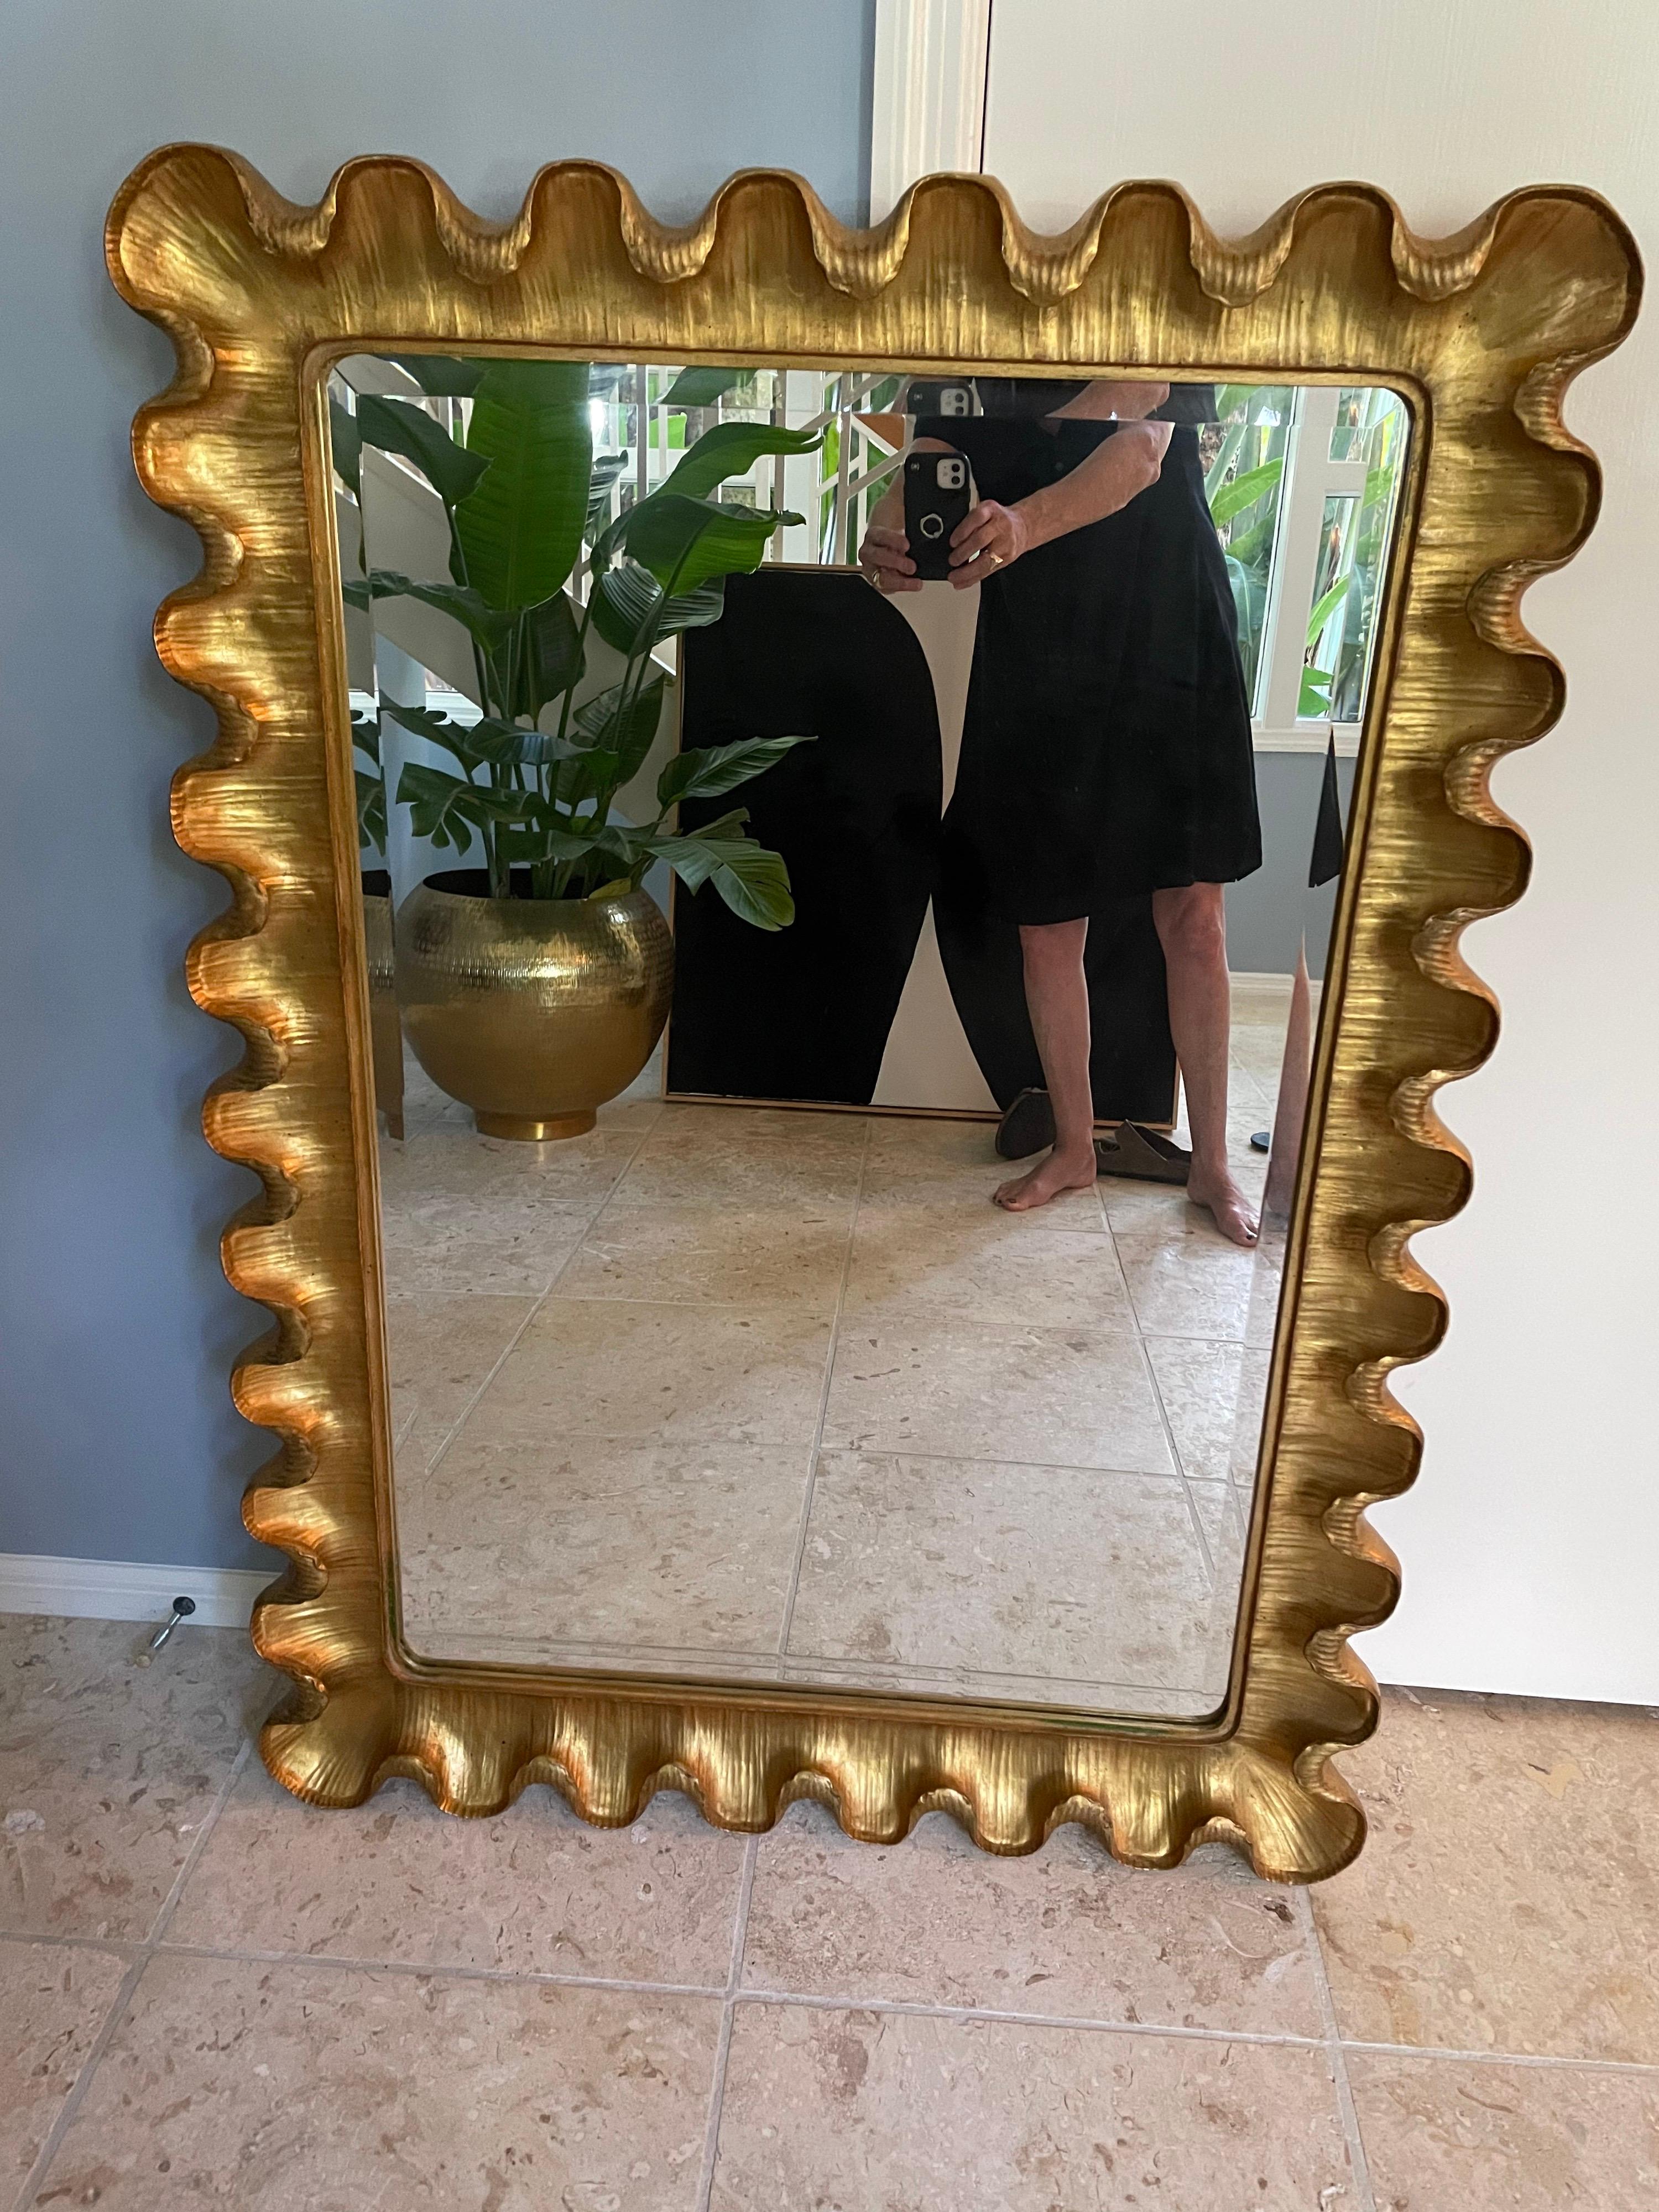 This is a wonderful mirror by Carvers Guild and is called the wave moderne in gold . It is a beautiful wall mirror that would look lovely in any home A beveled mirror adds extra cachet. Carvers Guild mirrors have been made in usa since 1970s.